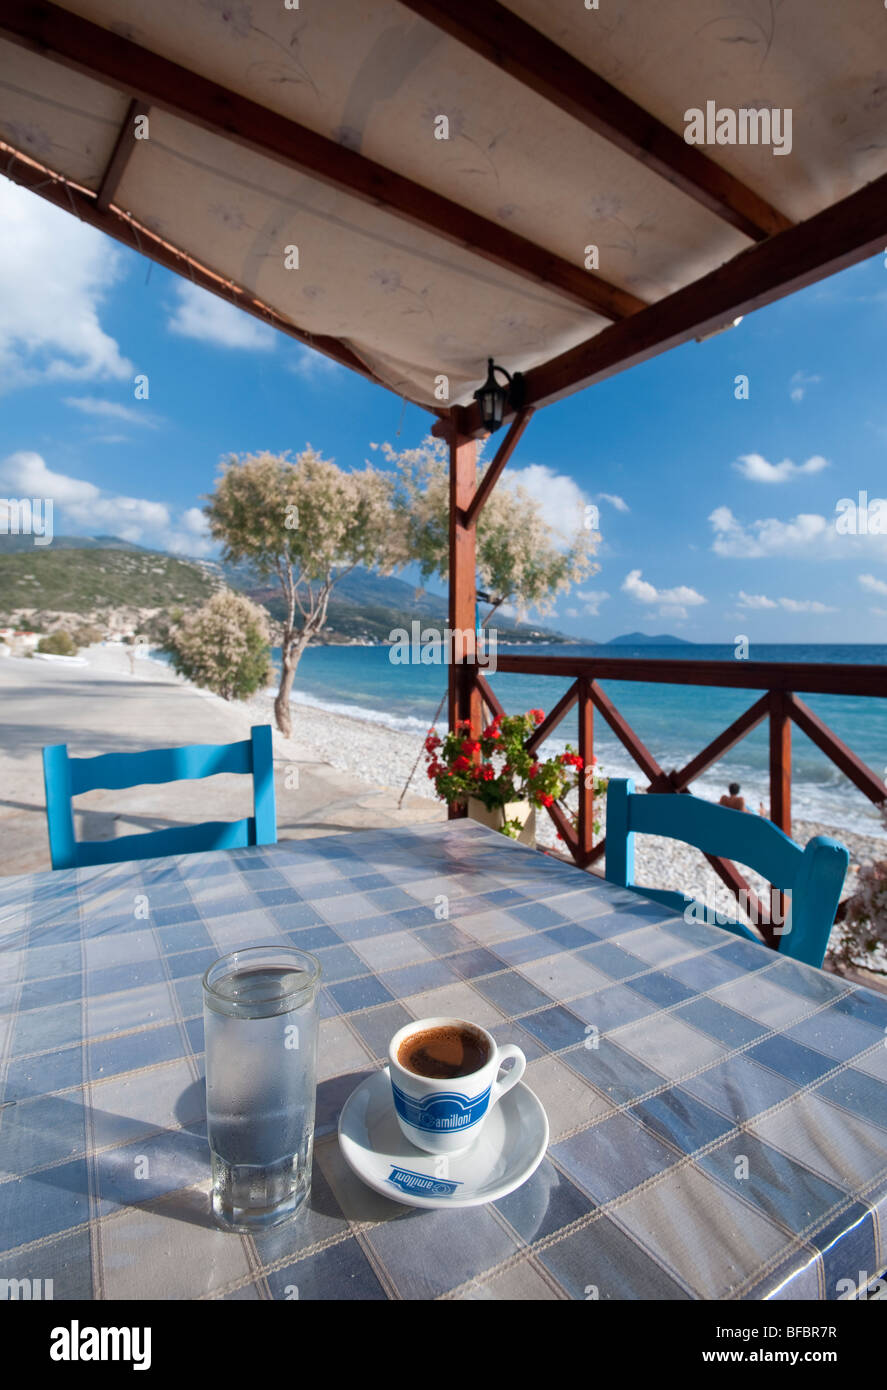 Greek coffee and glas full of water on a table in a tavern on a secluded and serene beach in Greece. Stock Photo